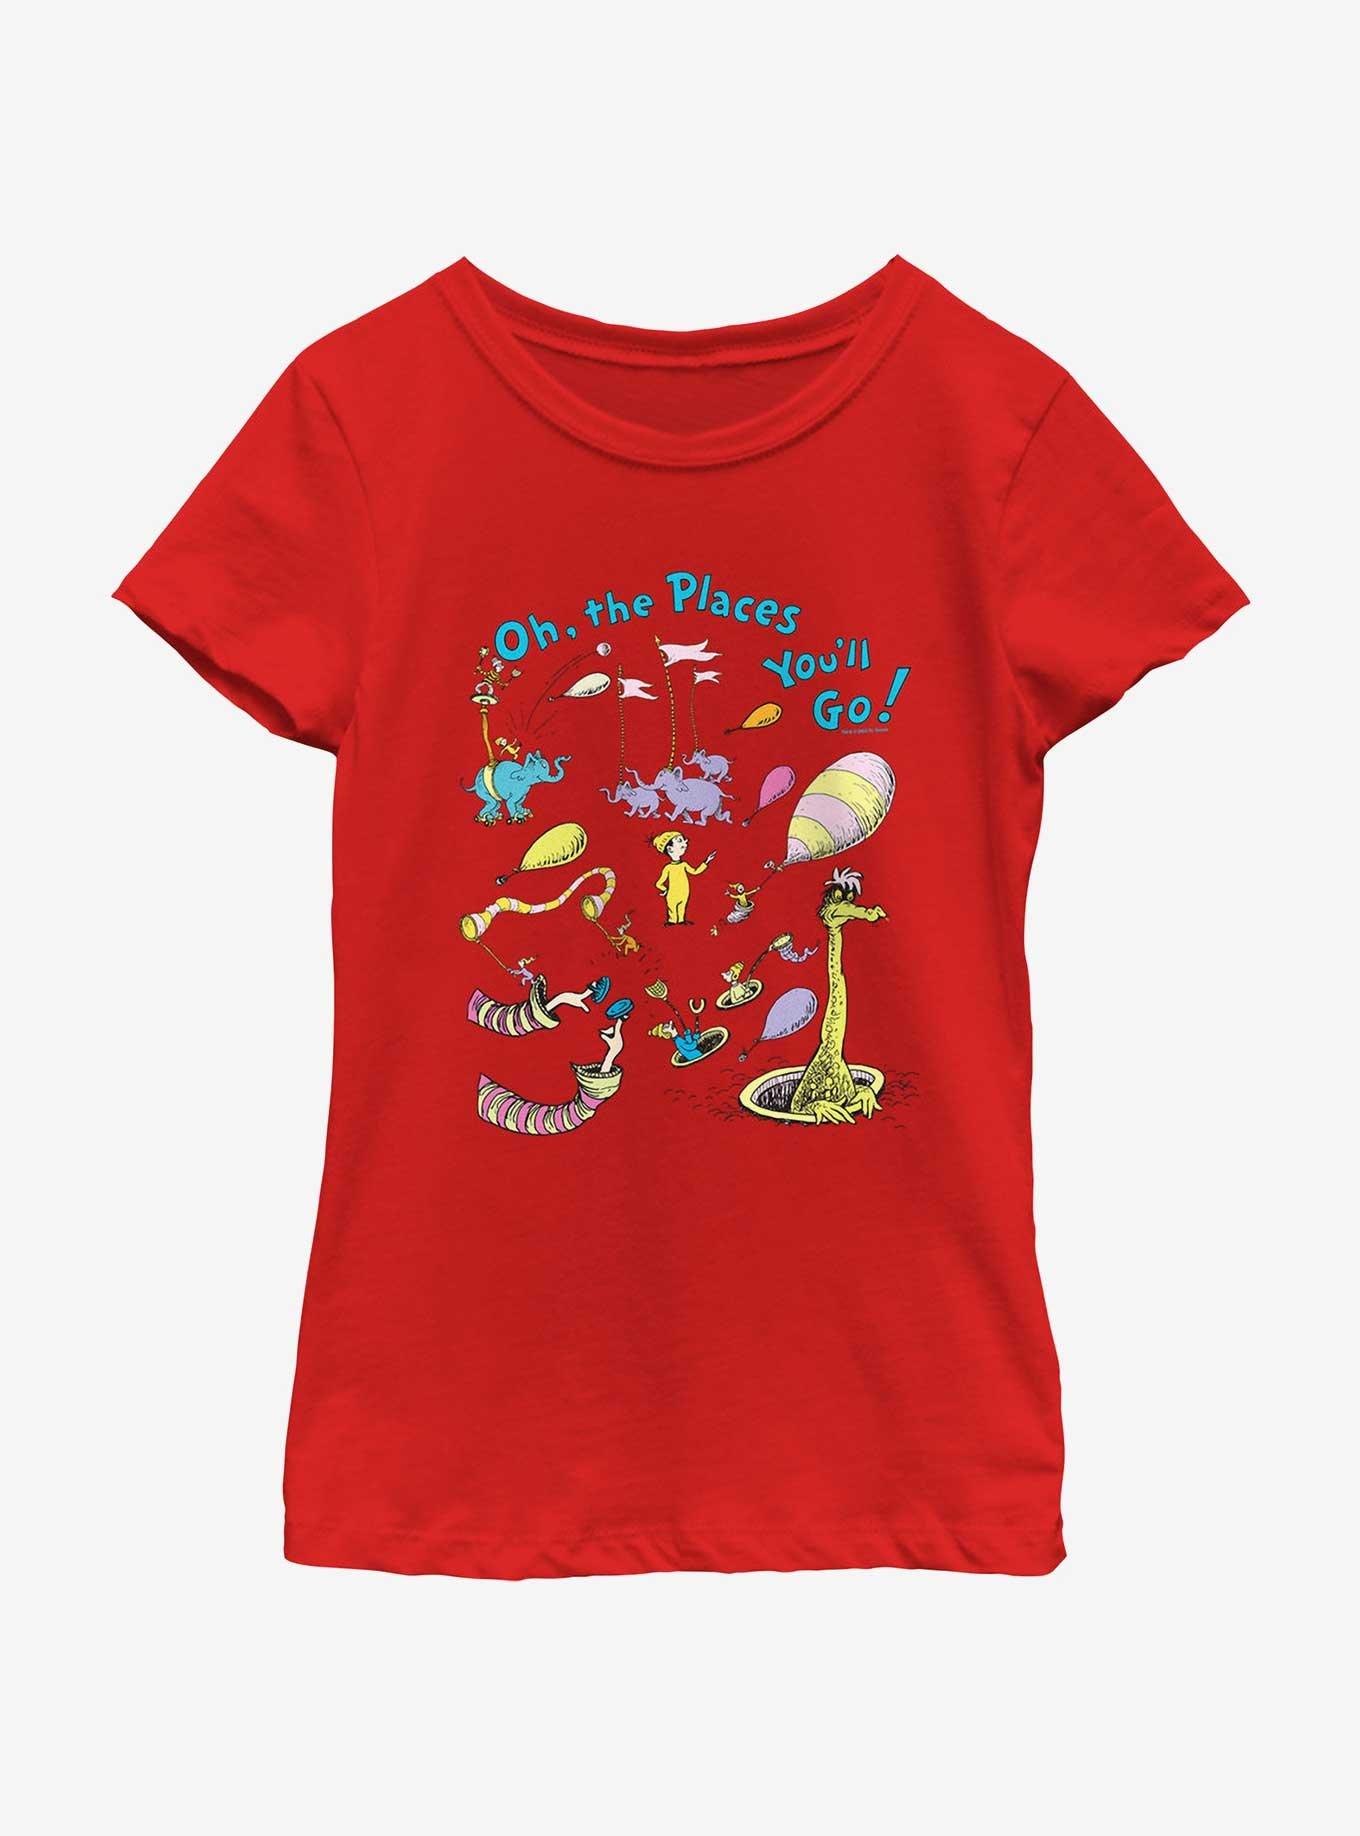 Dr. Seuss's Oh! The Places You'll Go Characters Youth Girls T-Shirt, RED, hi-res